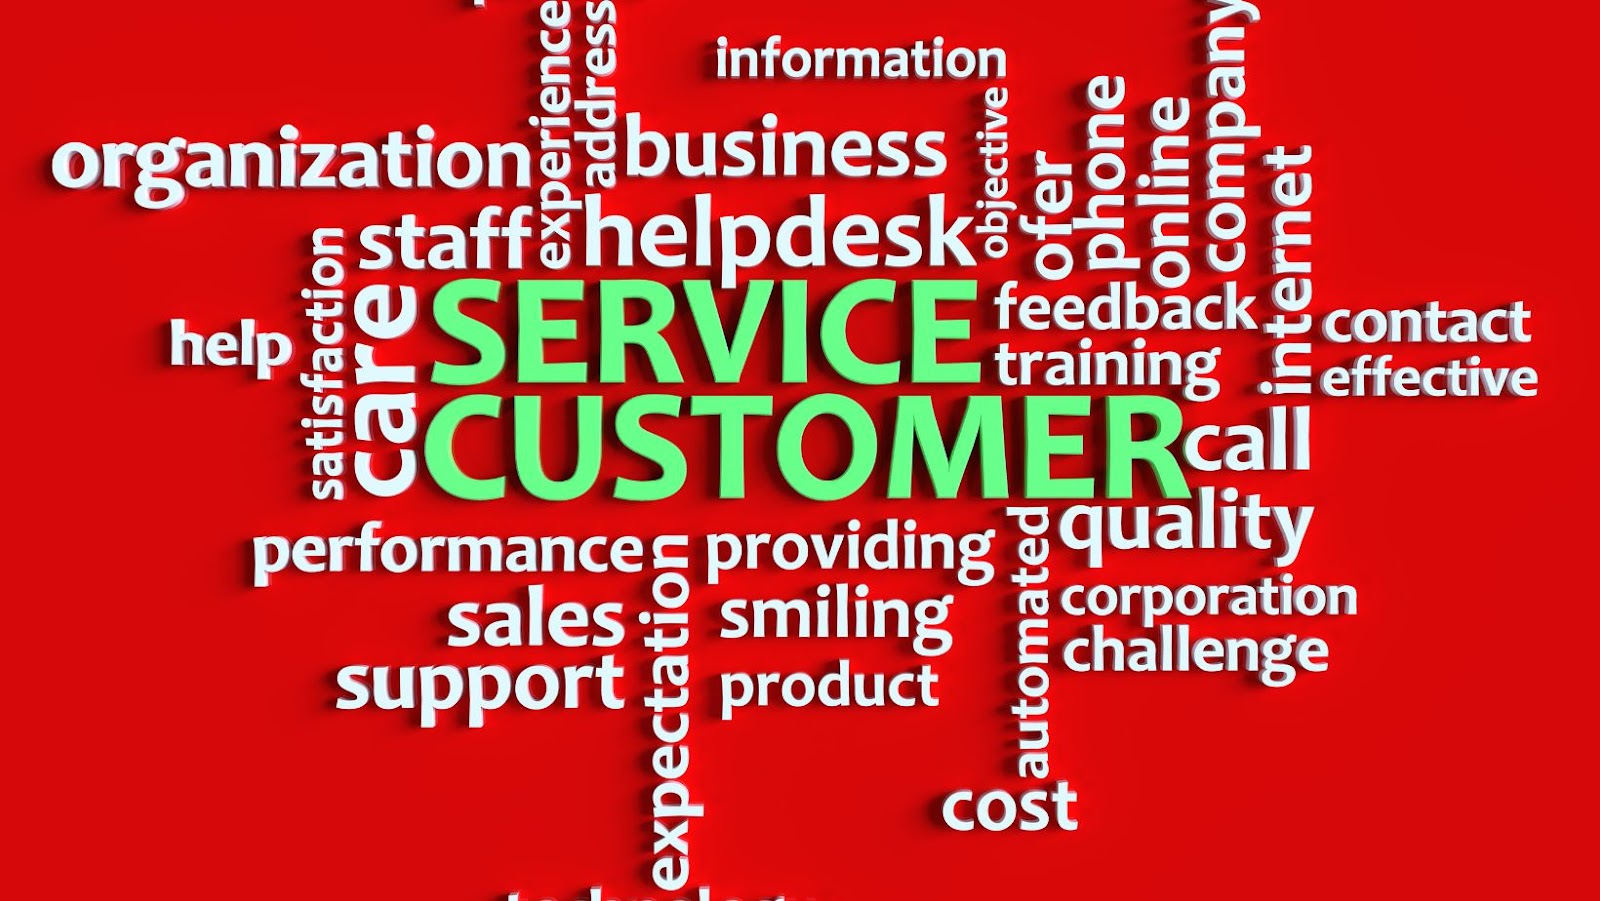 How Can Customer Service Me? - LyncConf